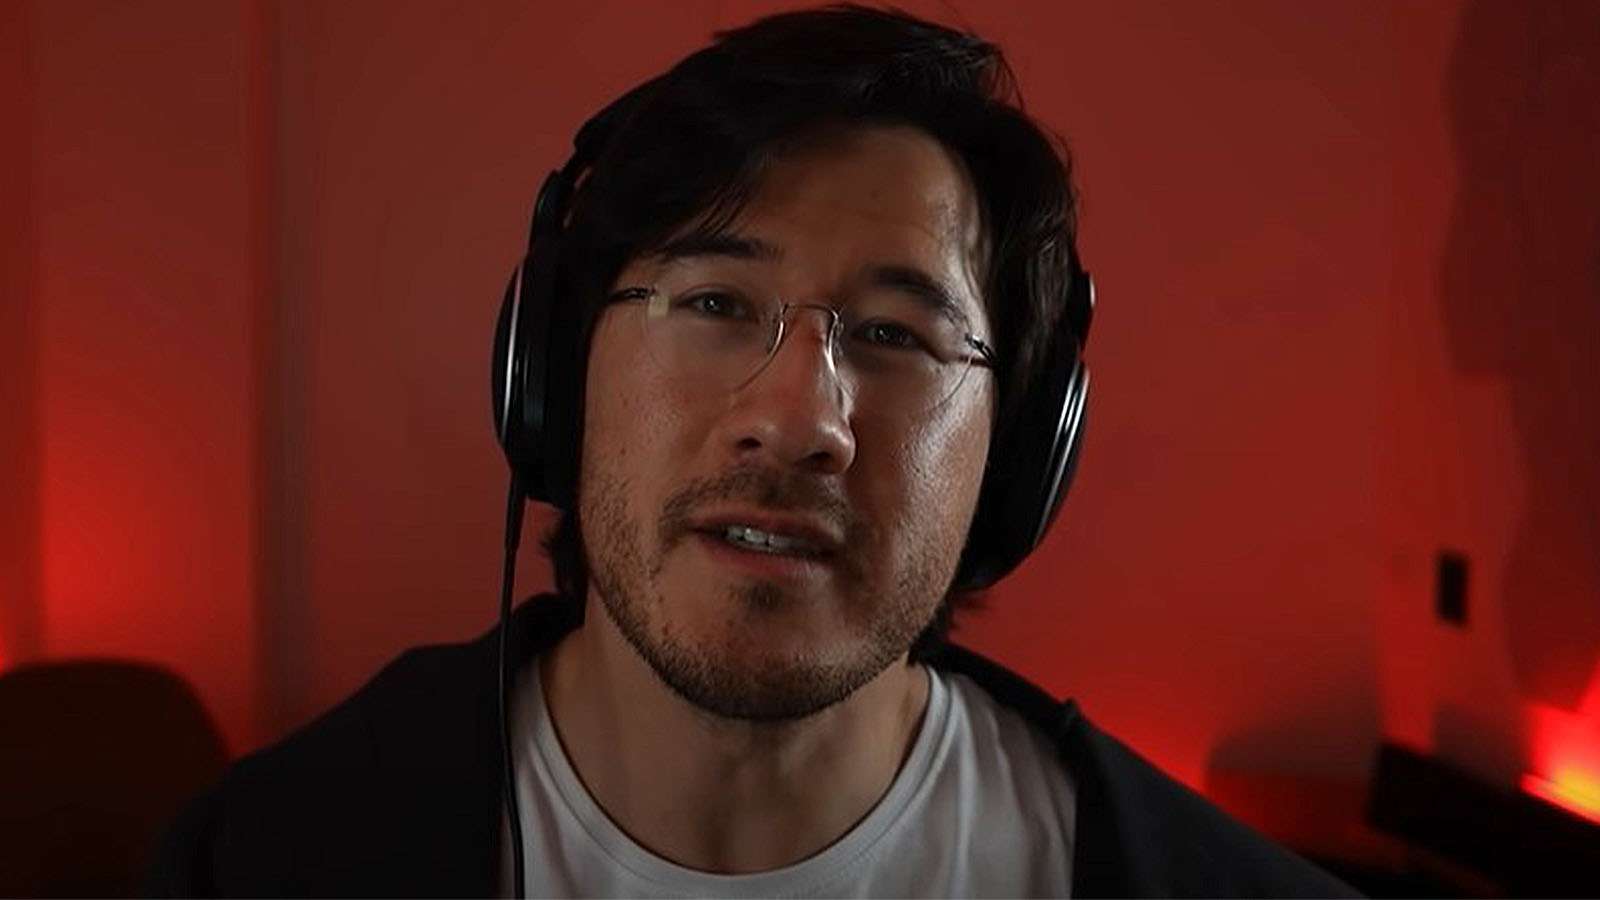 Markiplier blasts the emmys after series snubbed for award